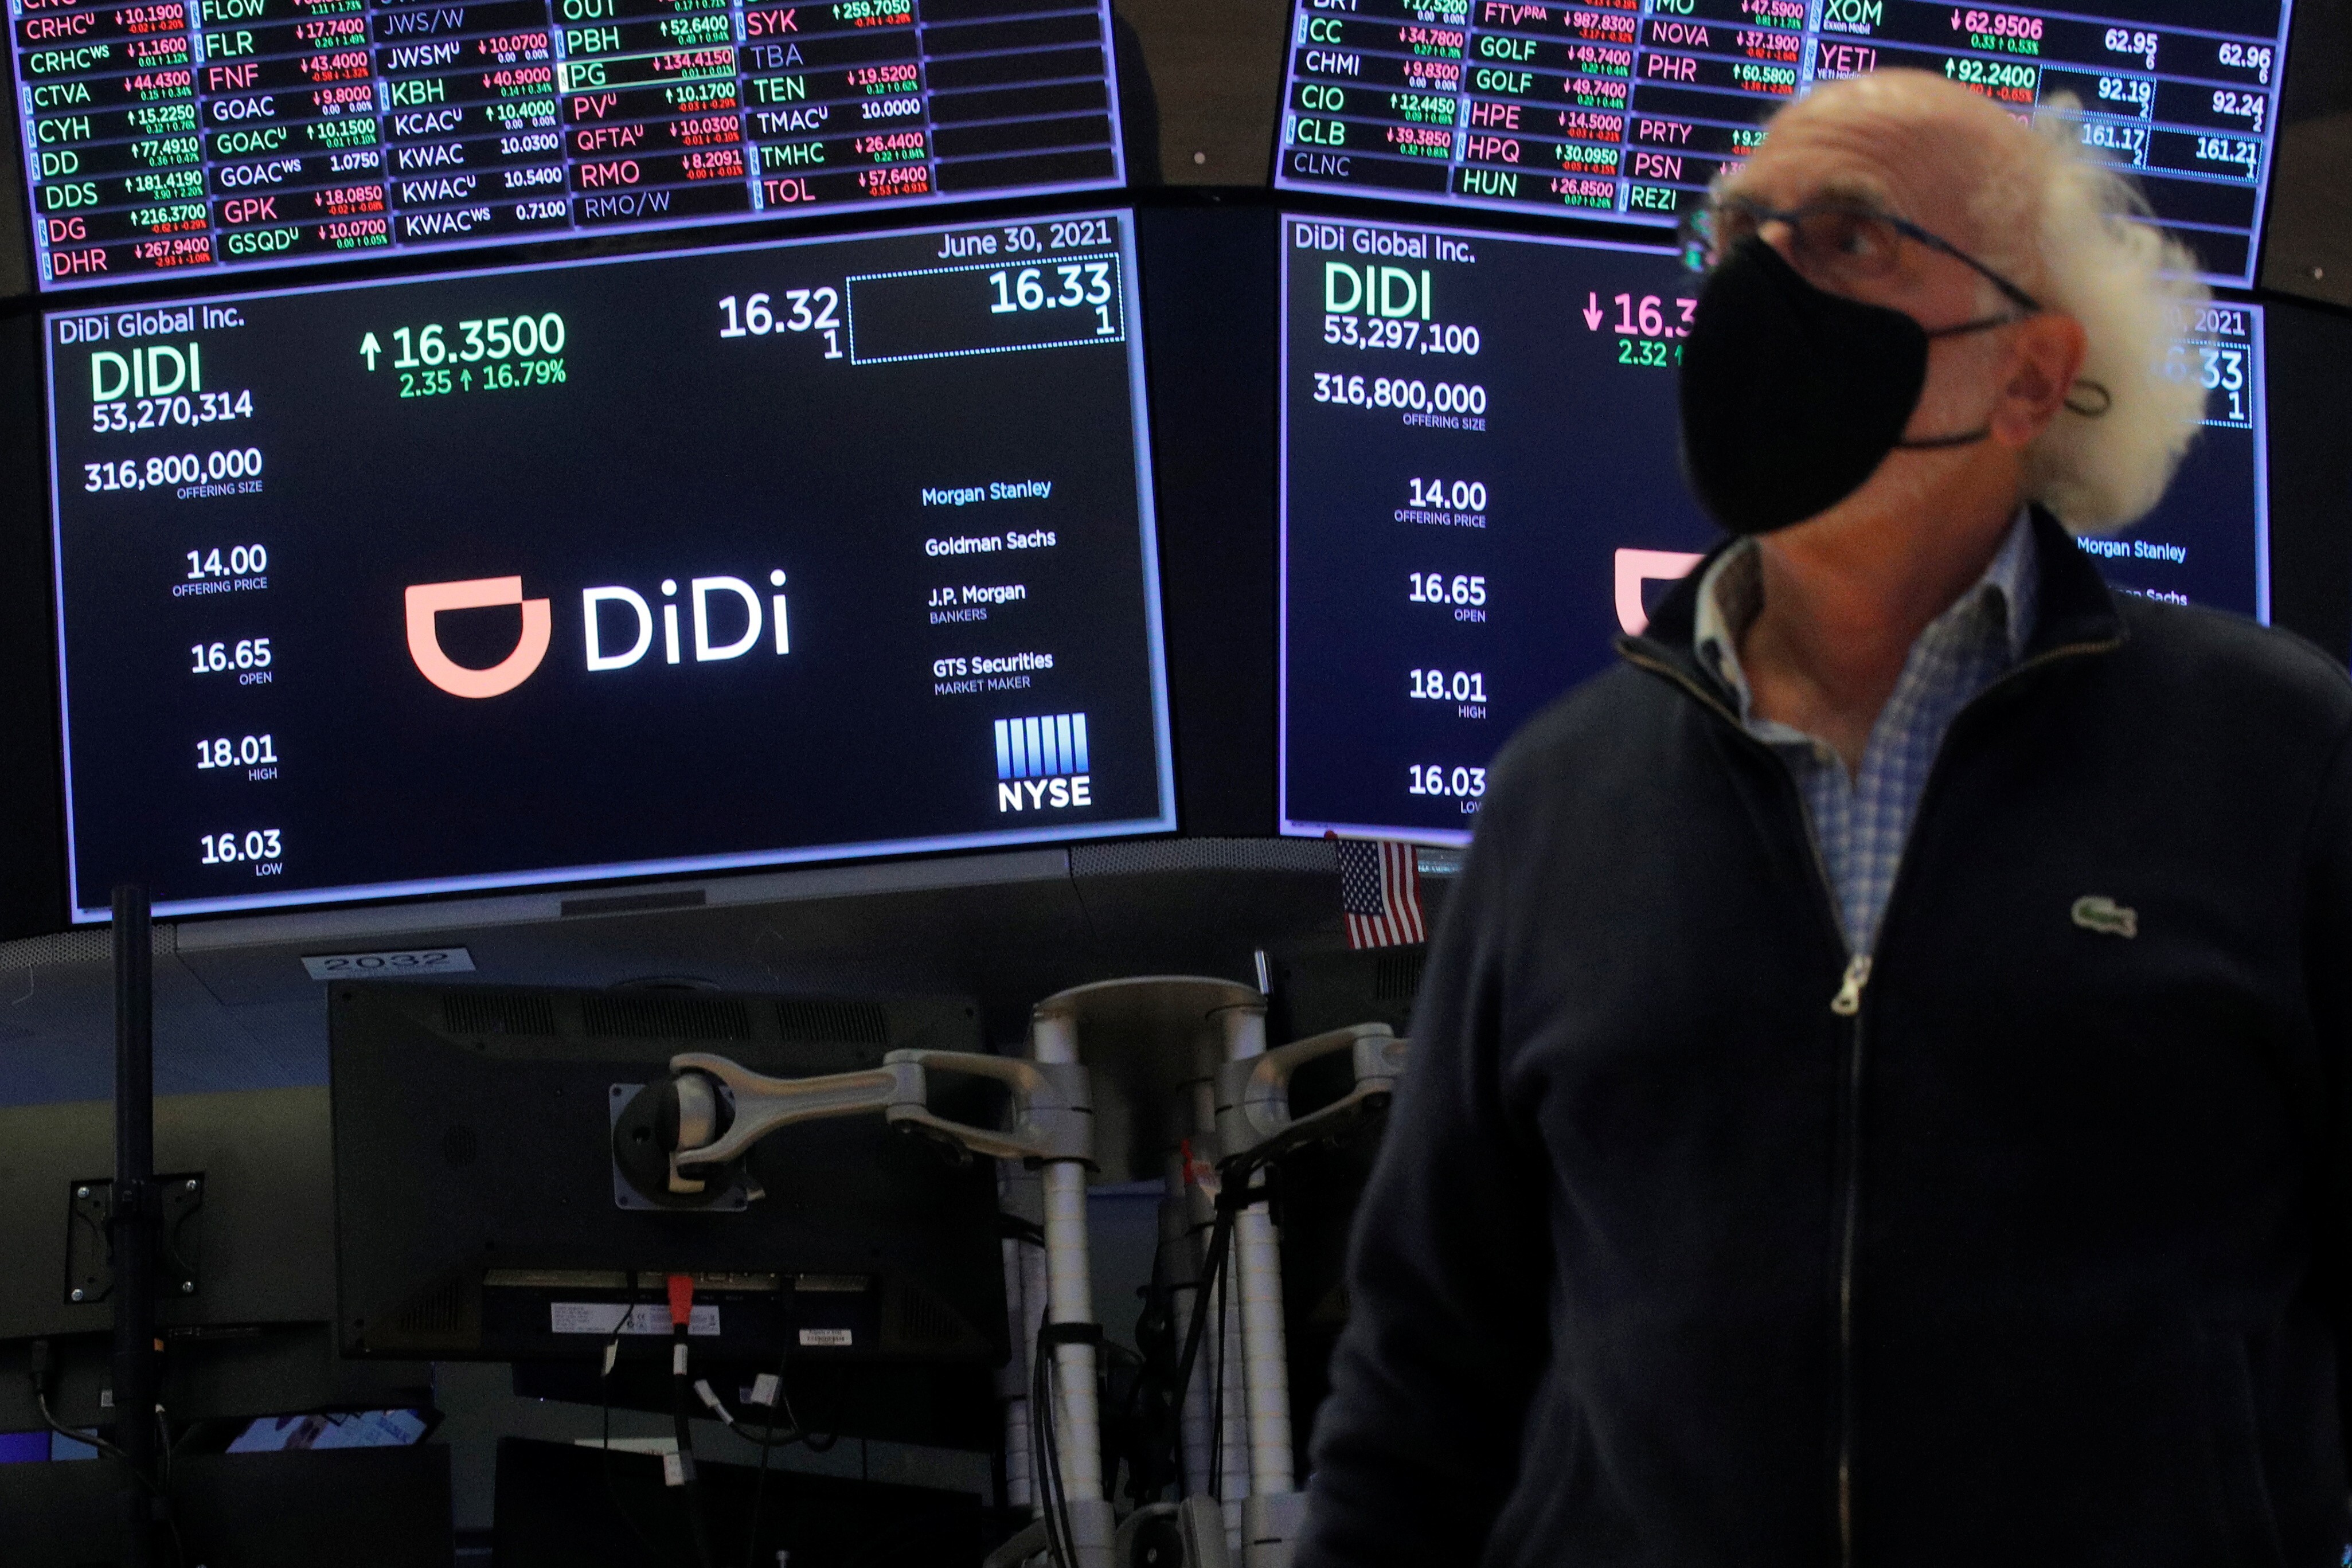 Traders work during the IPO for Chinese ride-hailing company Didi Global on the New York Stock Exchange (NYSE) floor on June 30, 2021. Photo: Reuters